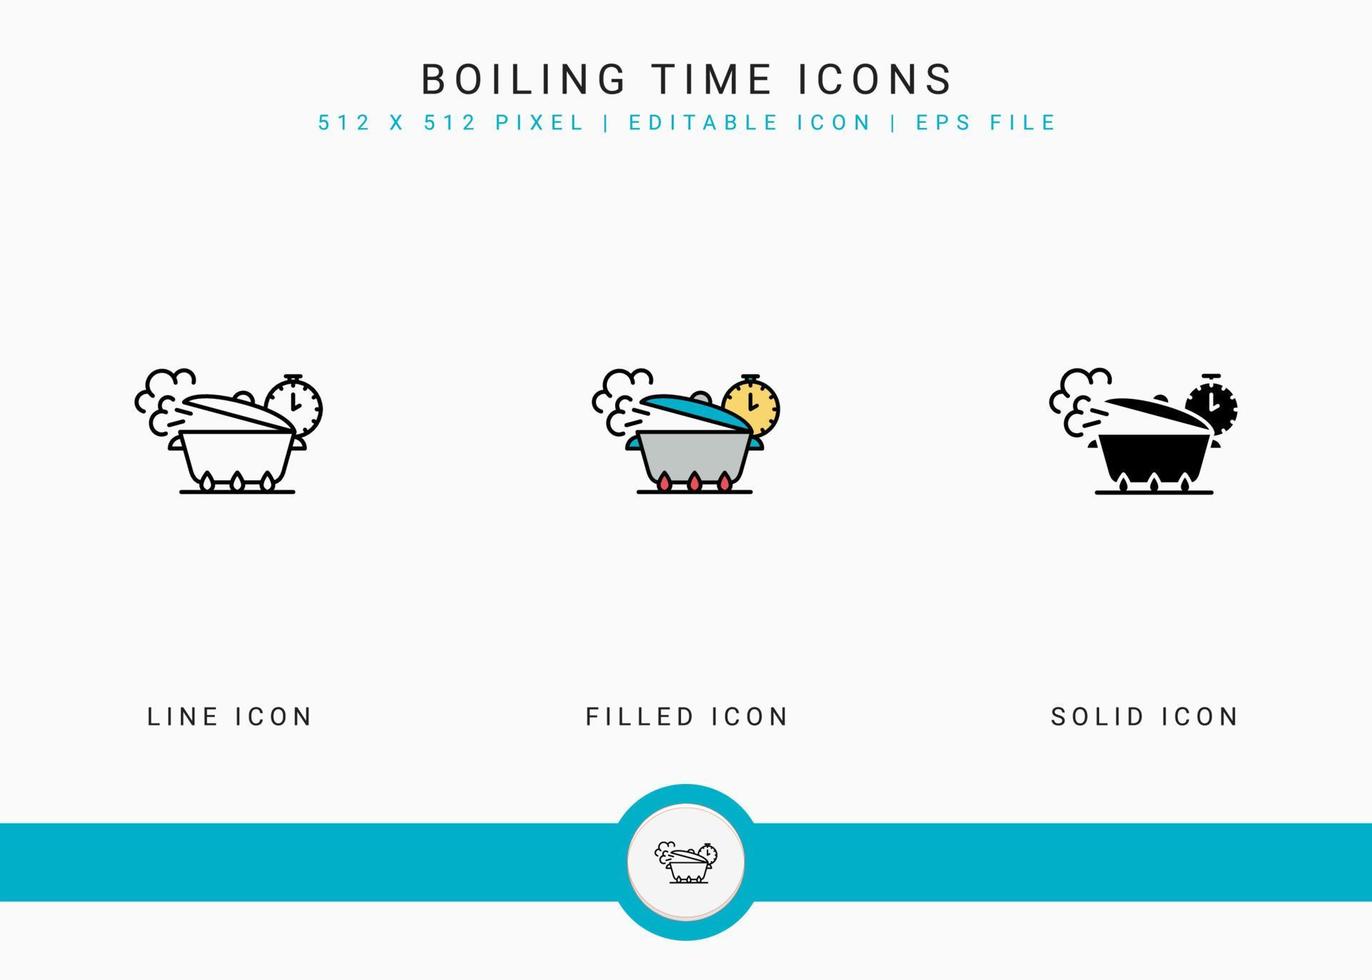 Boiling time icons set vector illustration with solid icon line style. Kitchen utensils concept. Editable stroke icon on isolated background for web design, user interface, and mobile application